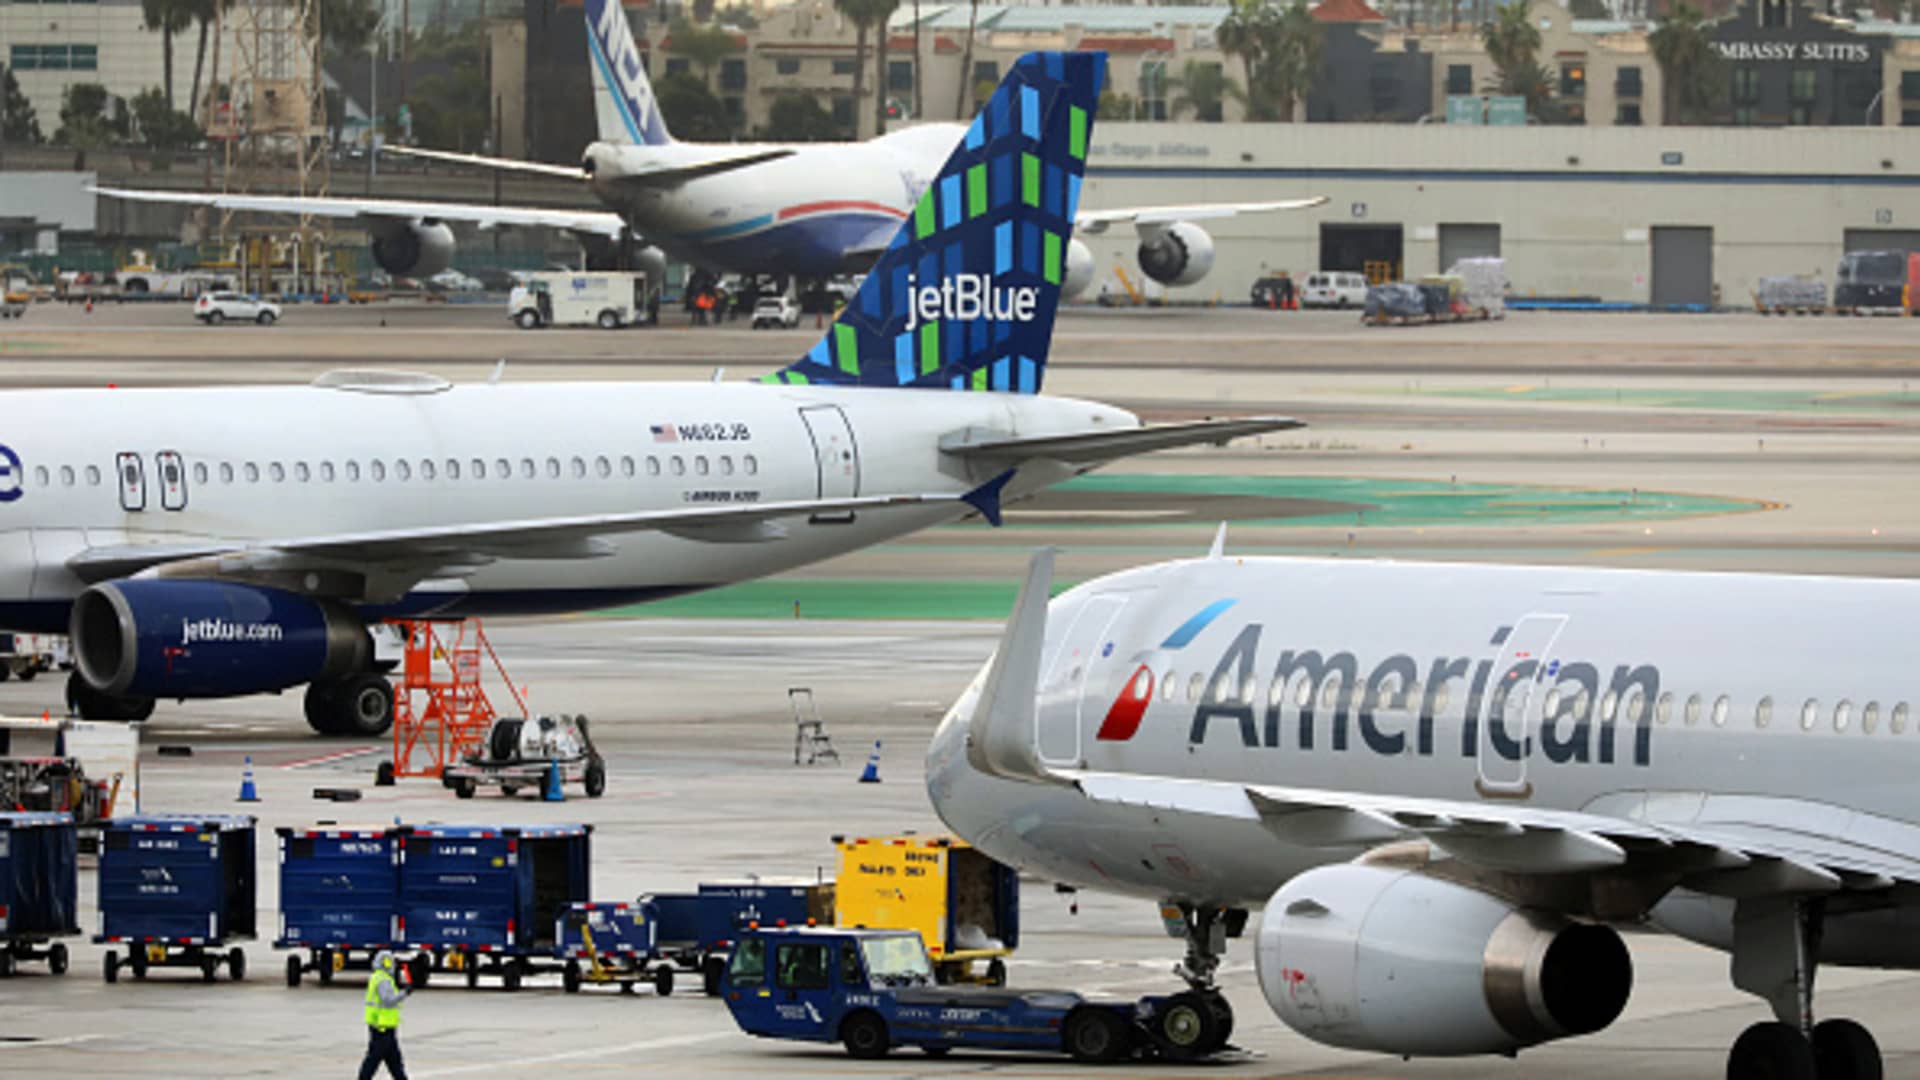 JetBlue says it will end American Airlines partnership after losing DOJ antitrust case, will focus on Spirit